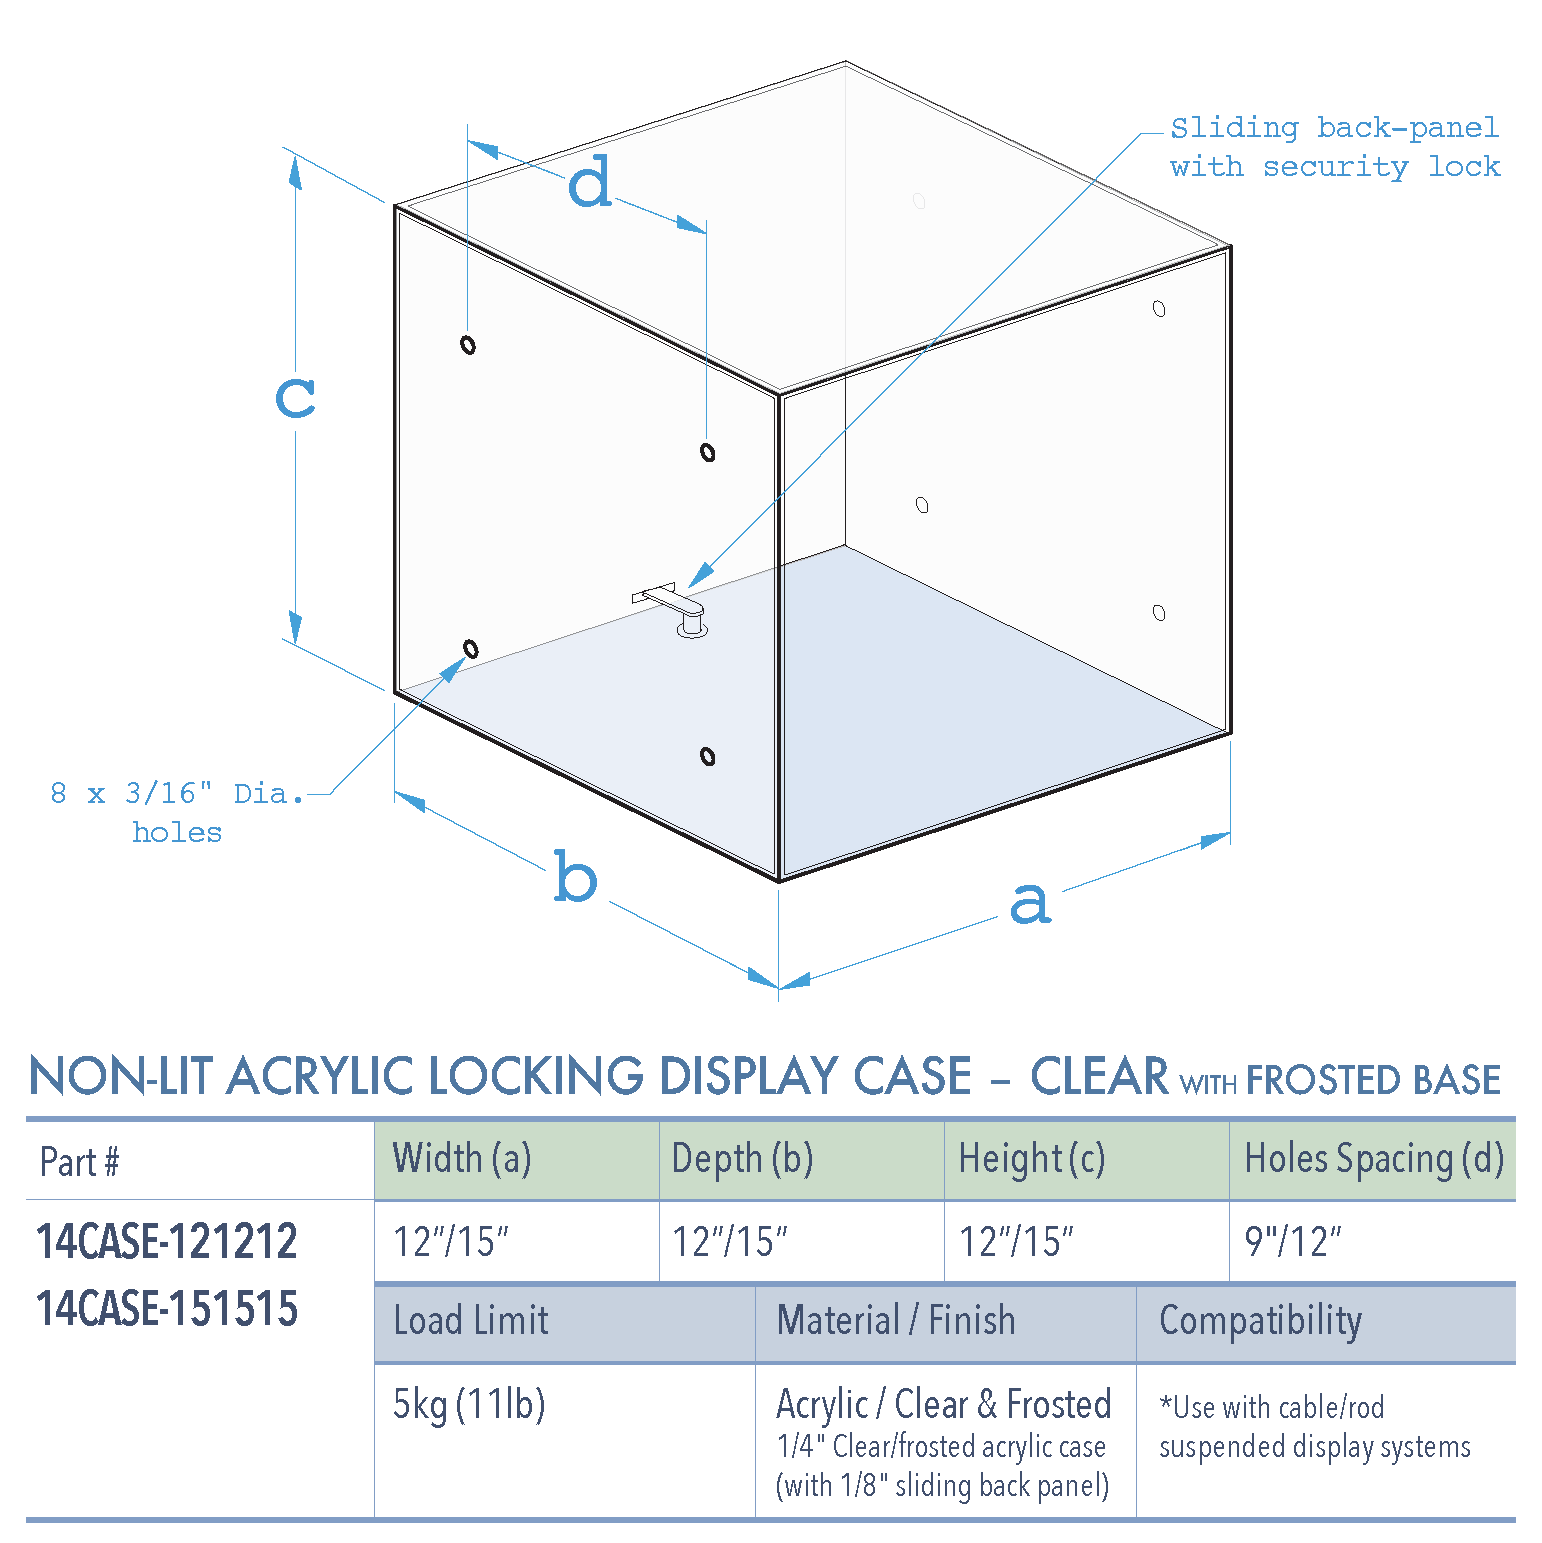 Specifications for 14CASE-FROSTED-BASE